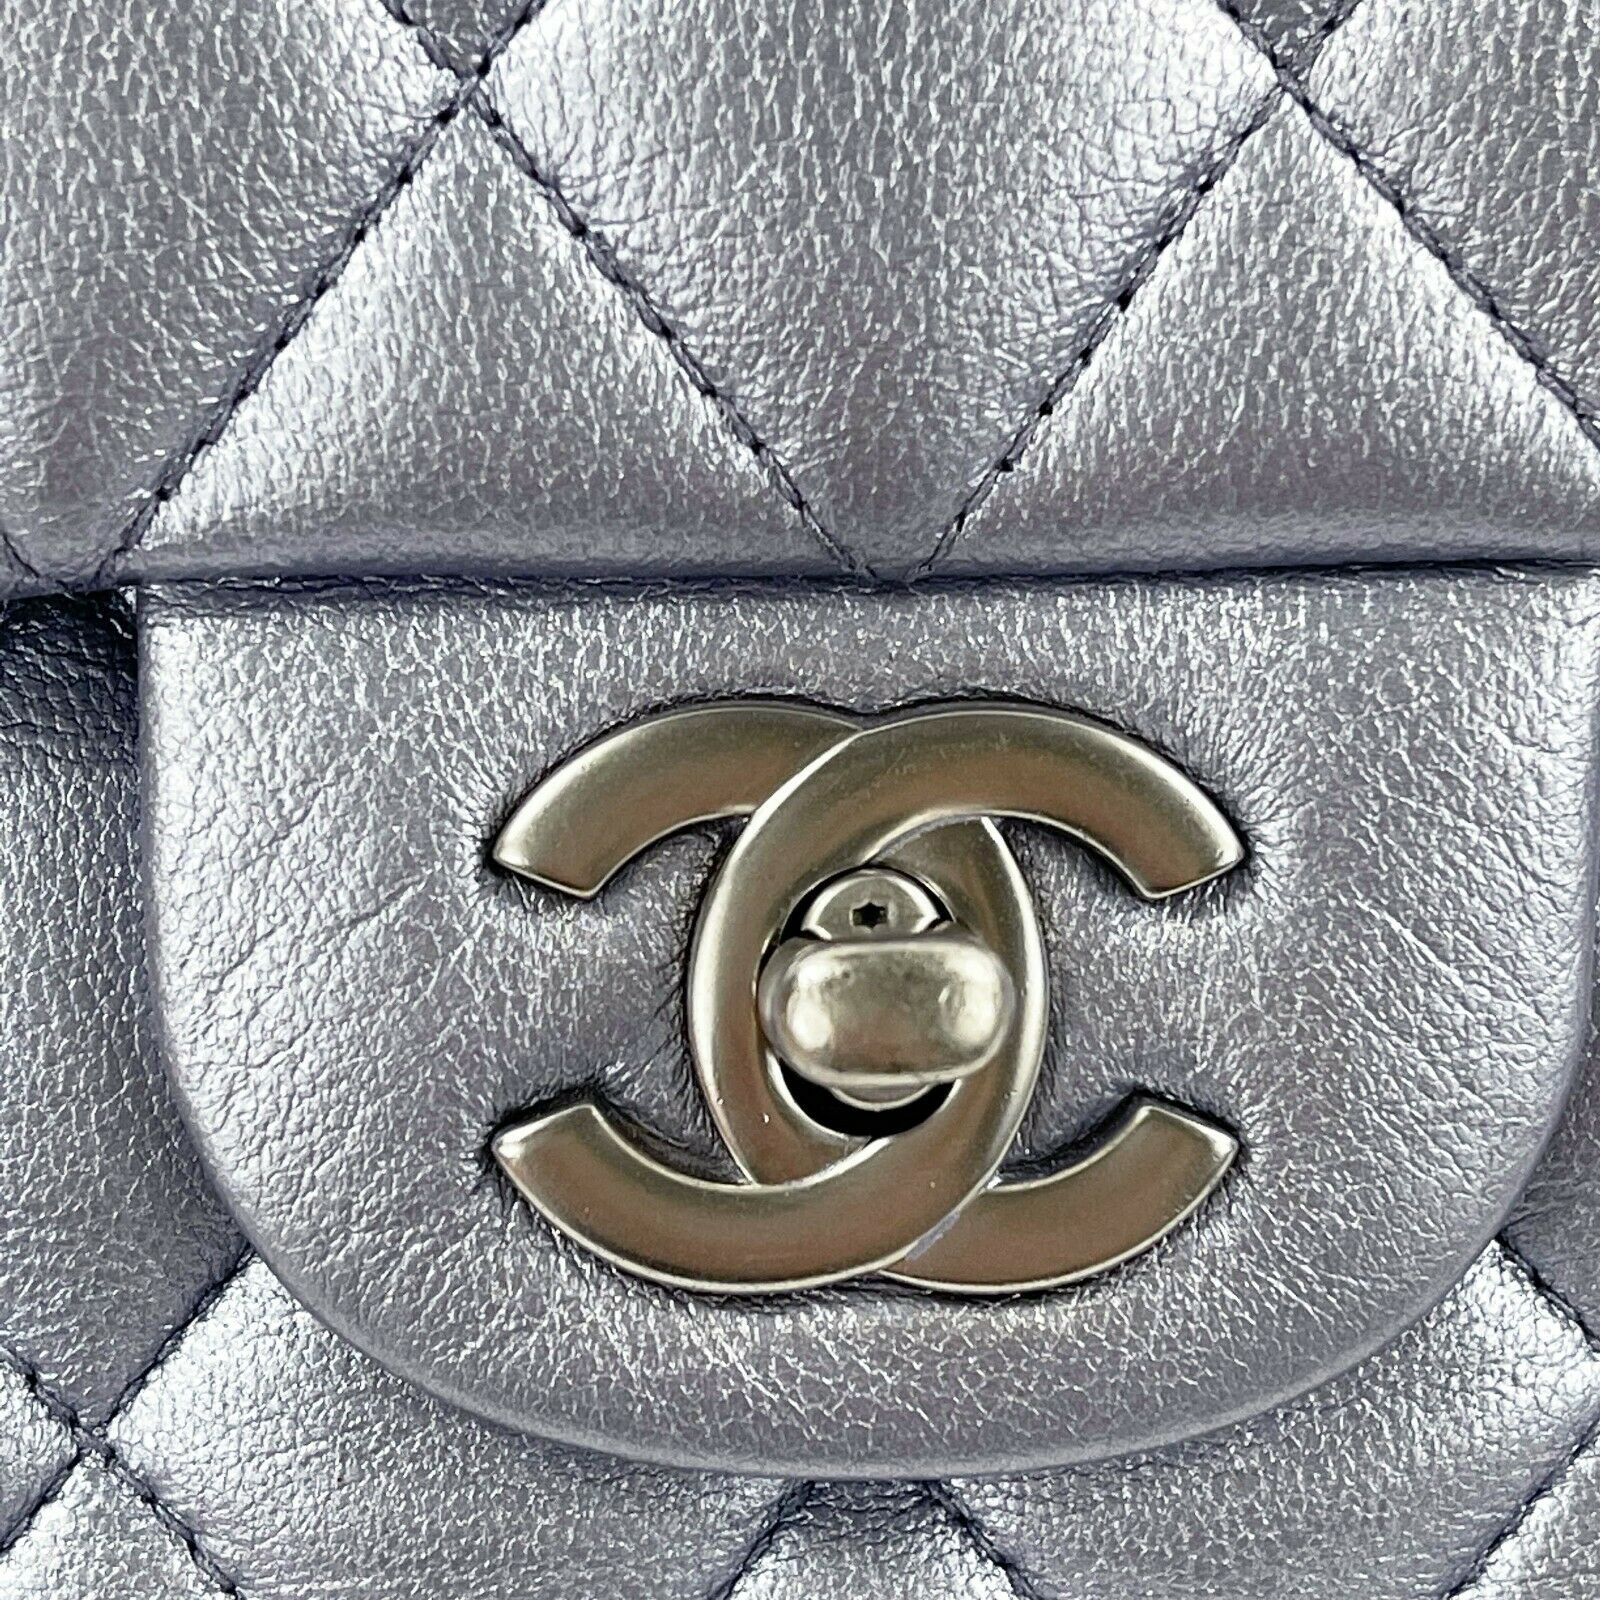 silver and black chanel bag authentic